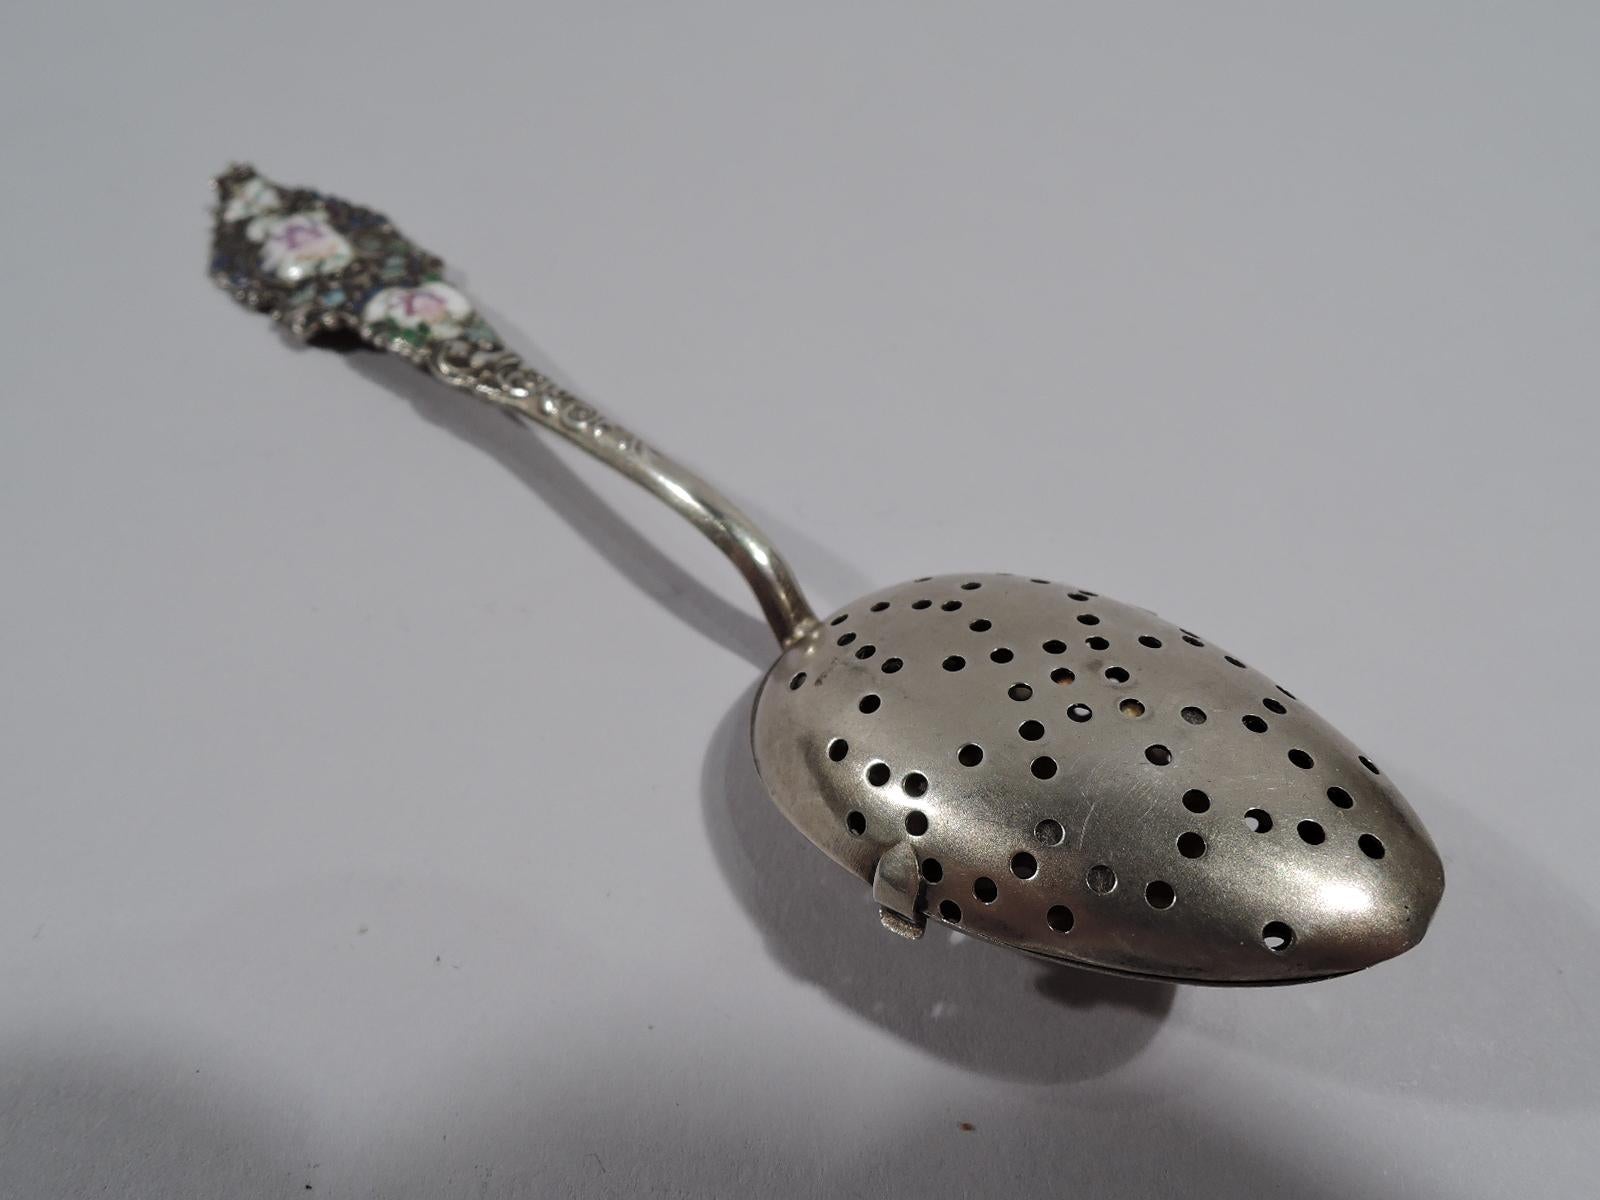 American Rococo gilt sterling silver and enamel tea infuser, circa 1890. Pierced oval bowl with hinged same cover. Scrolled and tapering shaft and terminal with enameled flowers and leaves. Terminal reverse engraved with script monogram. Marked